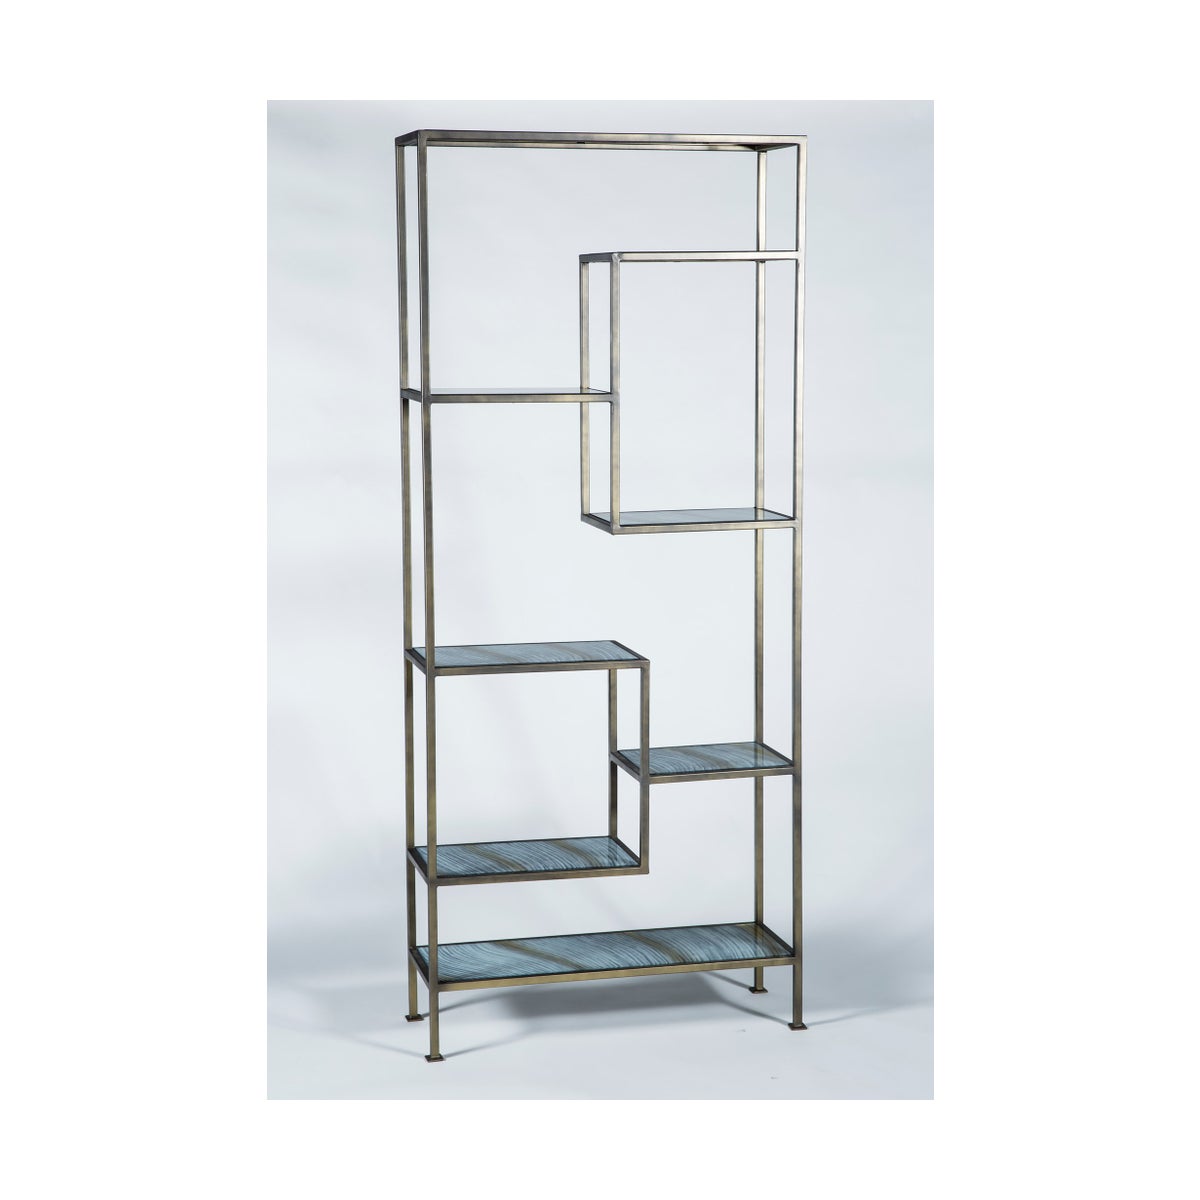 Solomon Etagere in Antique Brass with Glass Shelves in Cheers Finish